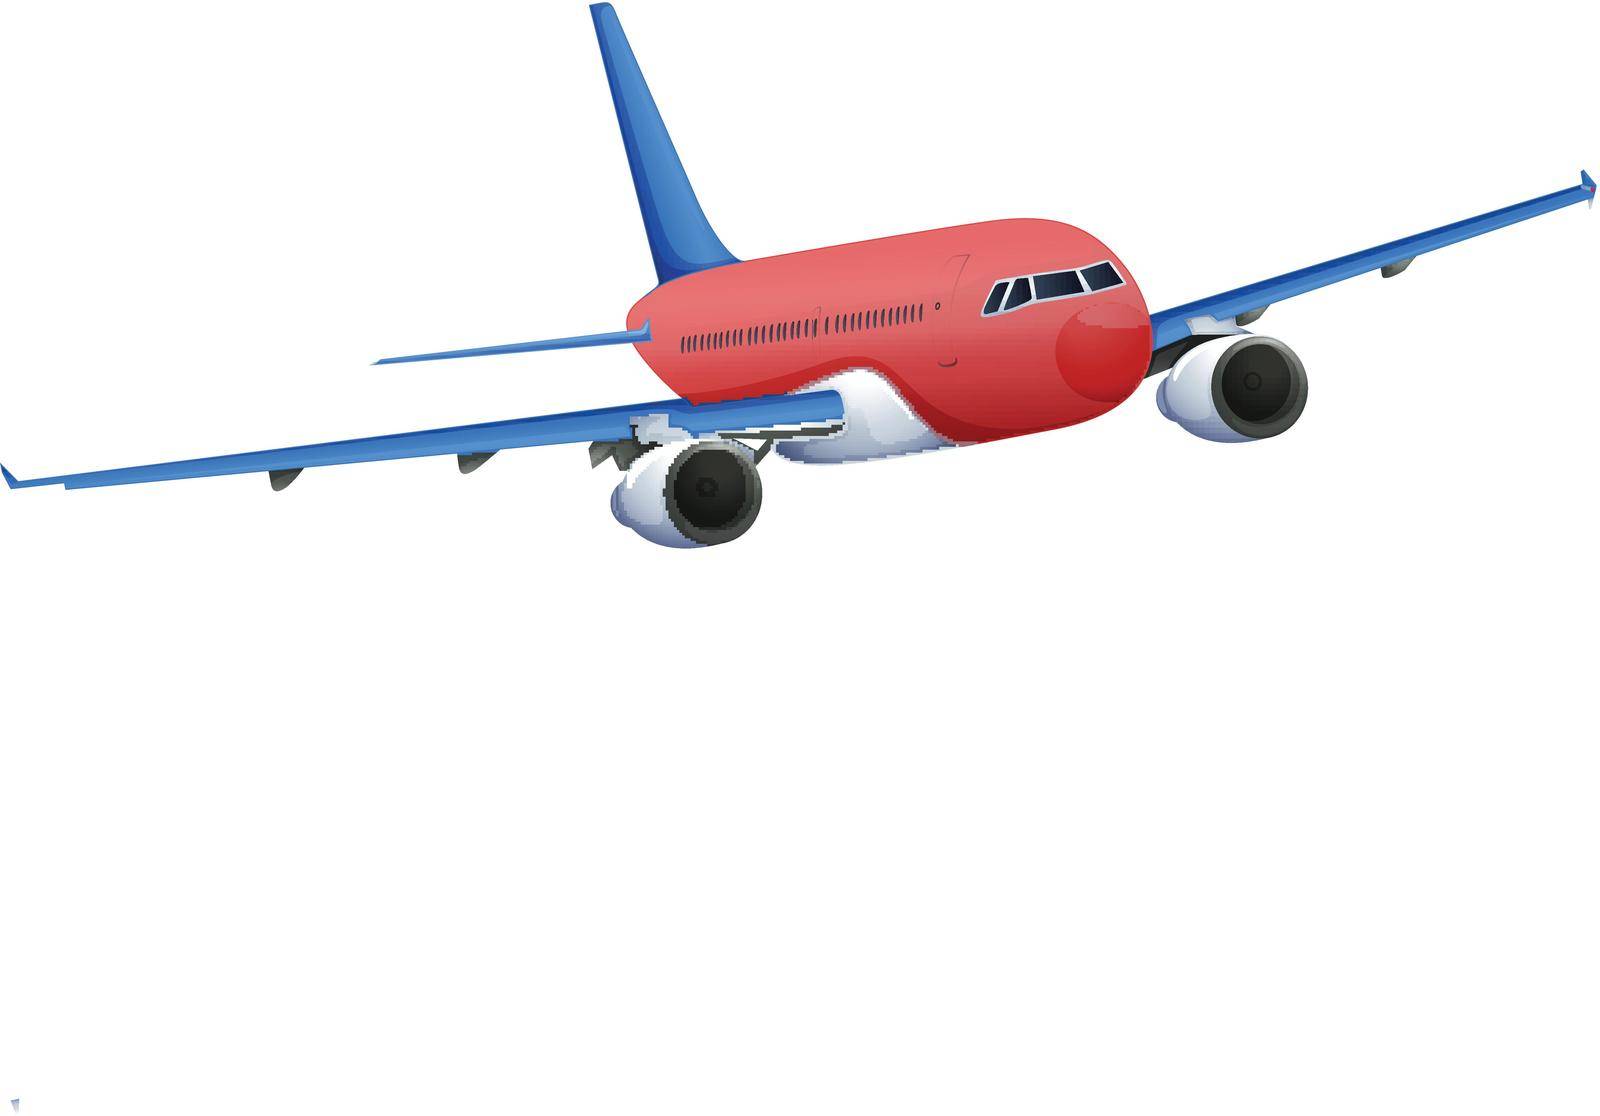 Illustration of a red plane on a white background